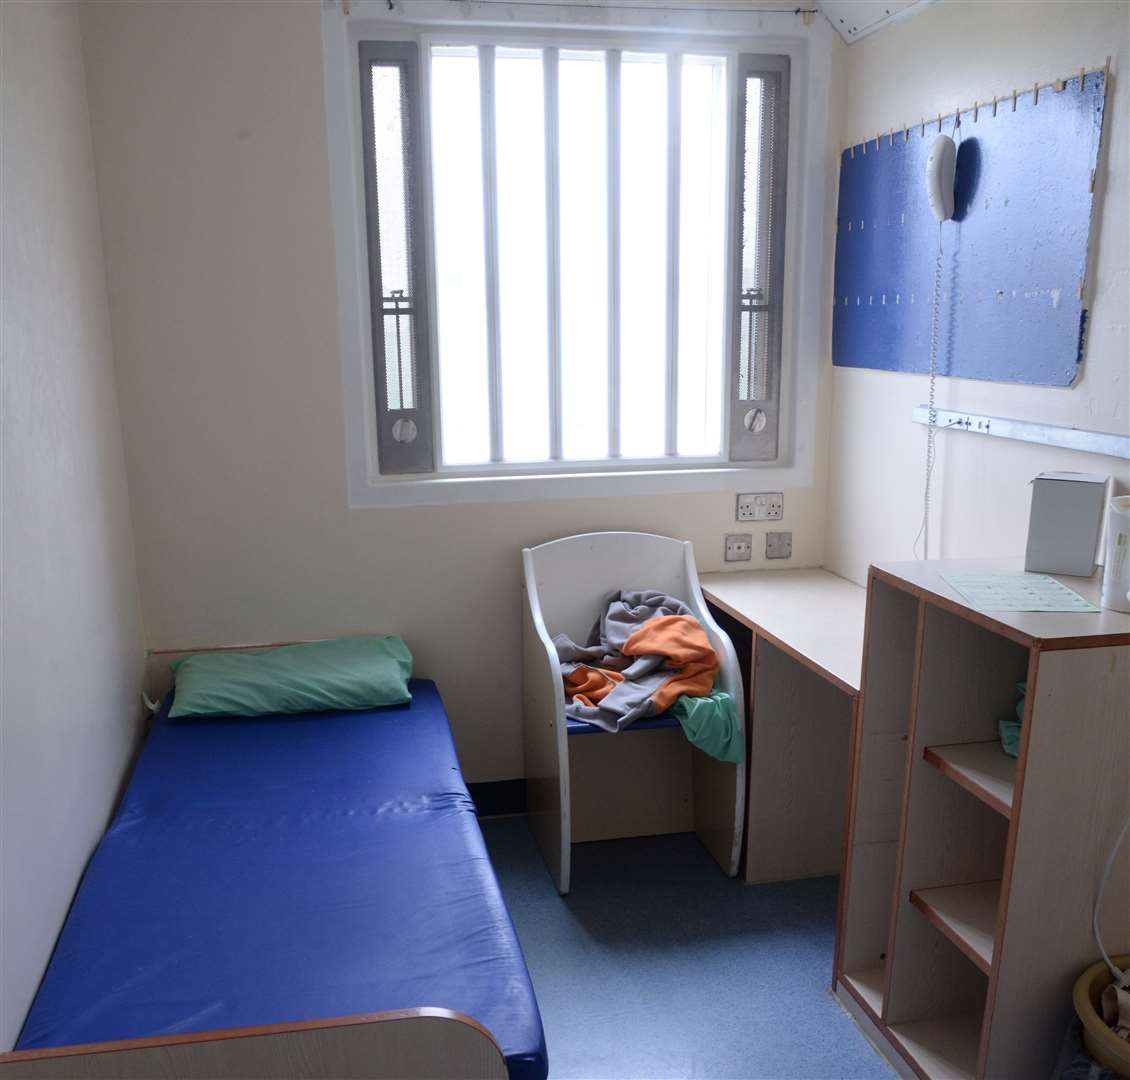 A cell at HMP Swaleside. Picture: Chris Davey